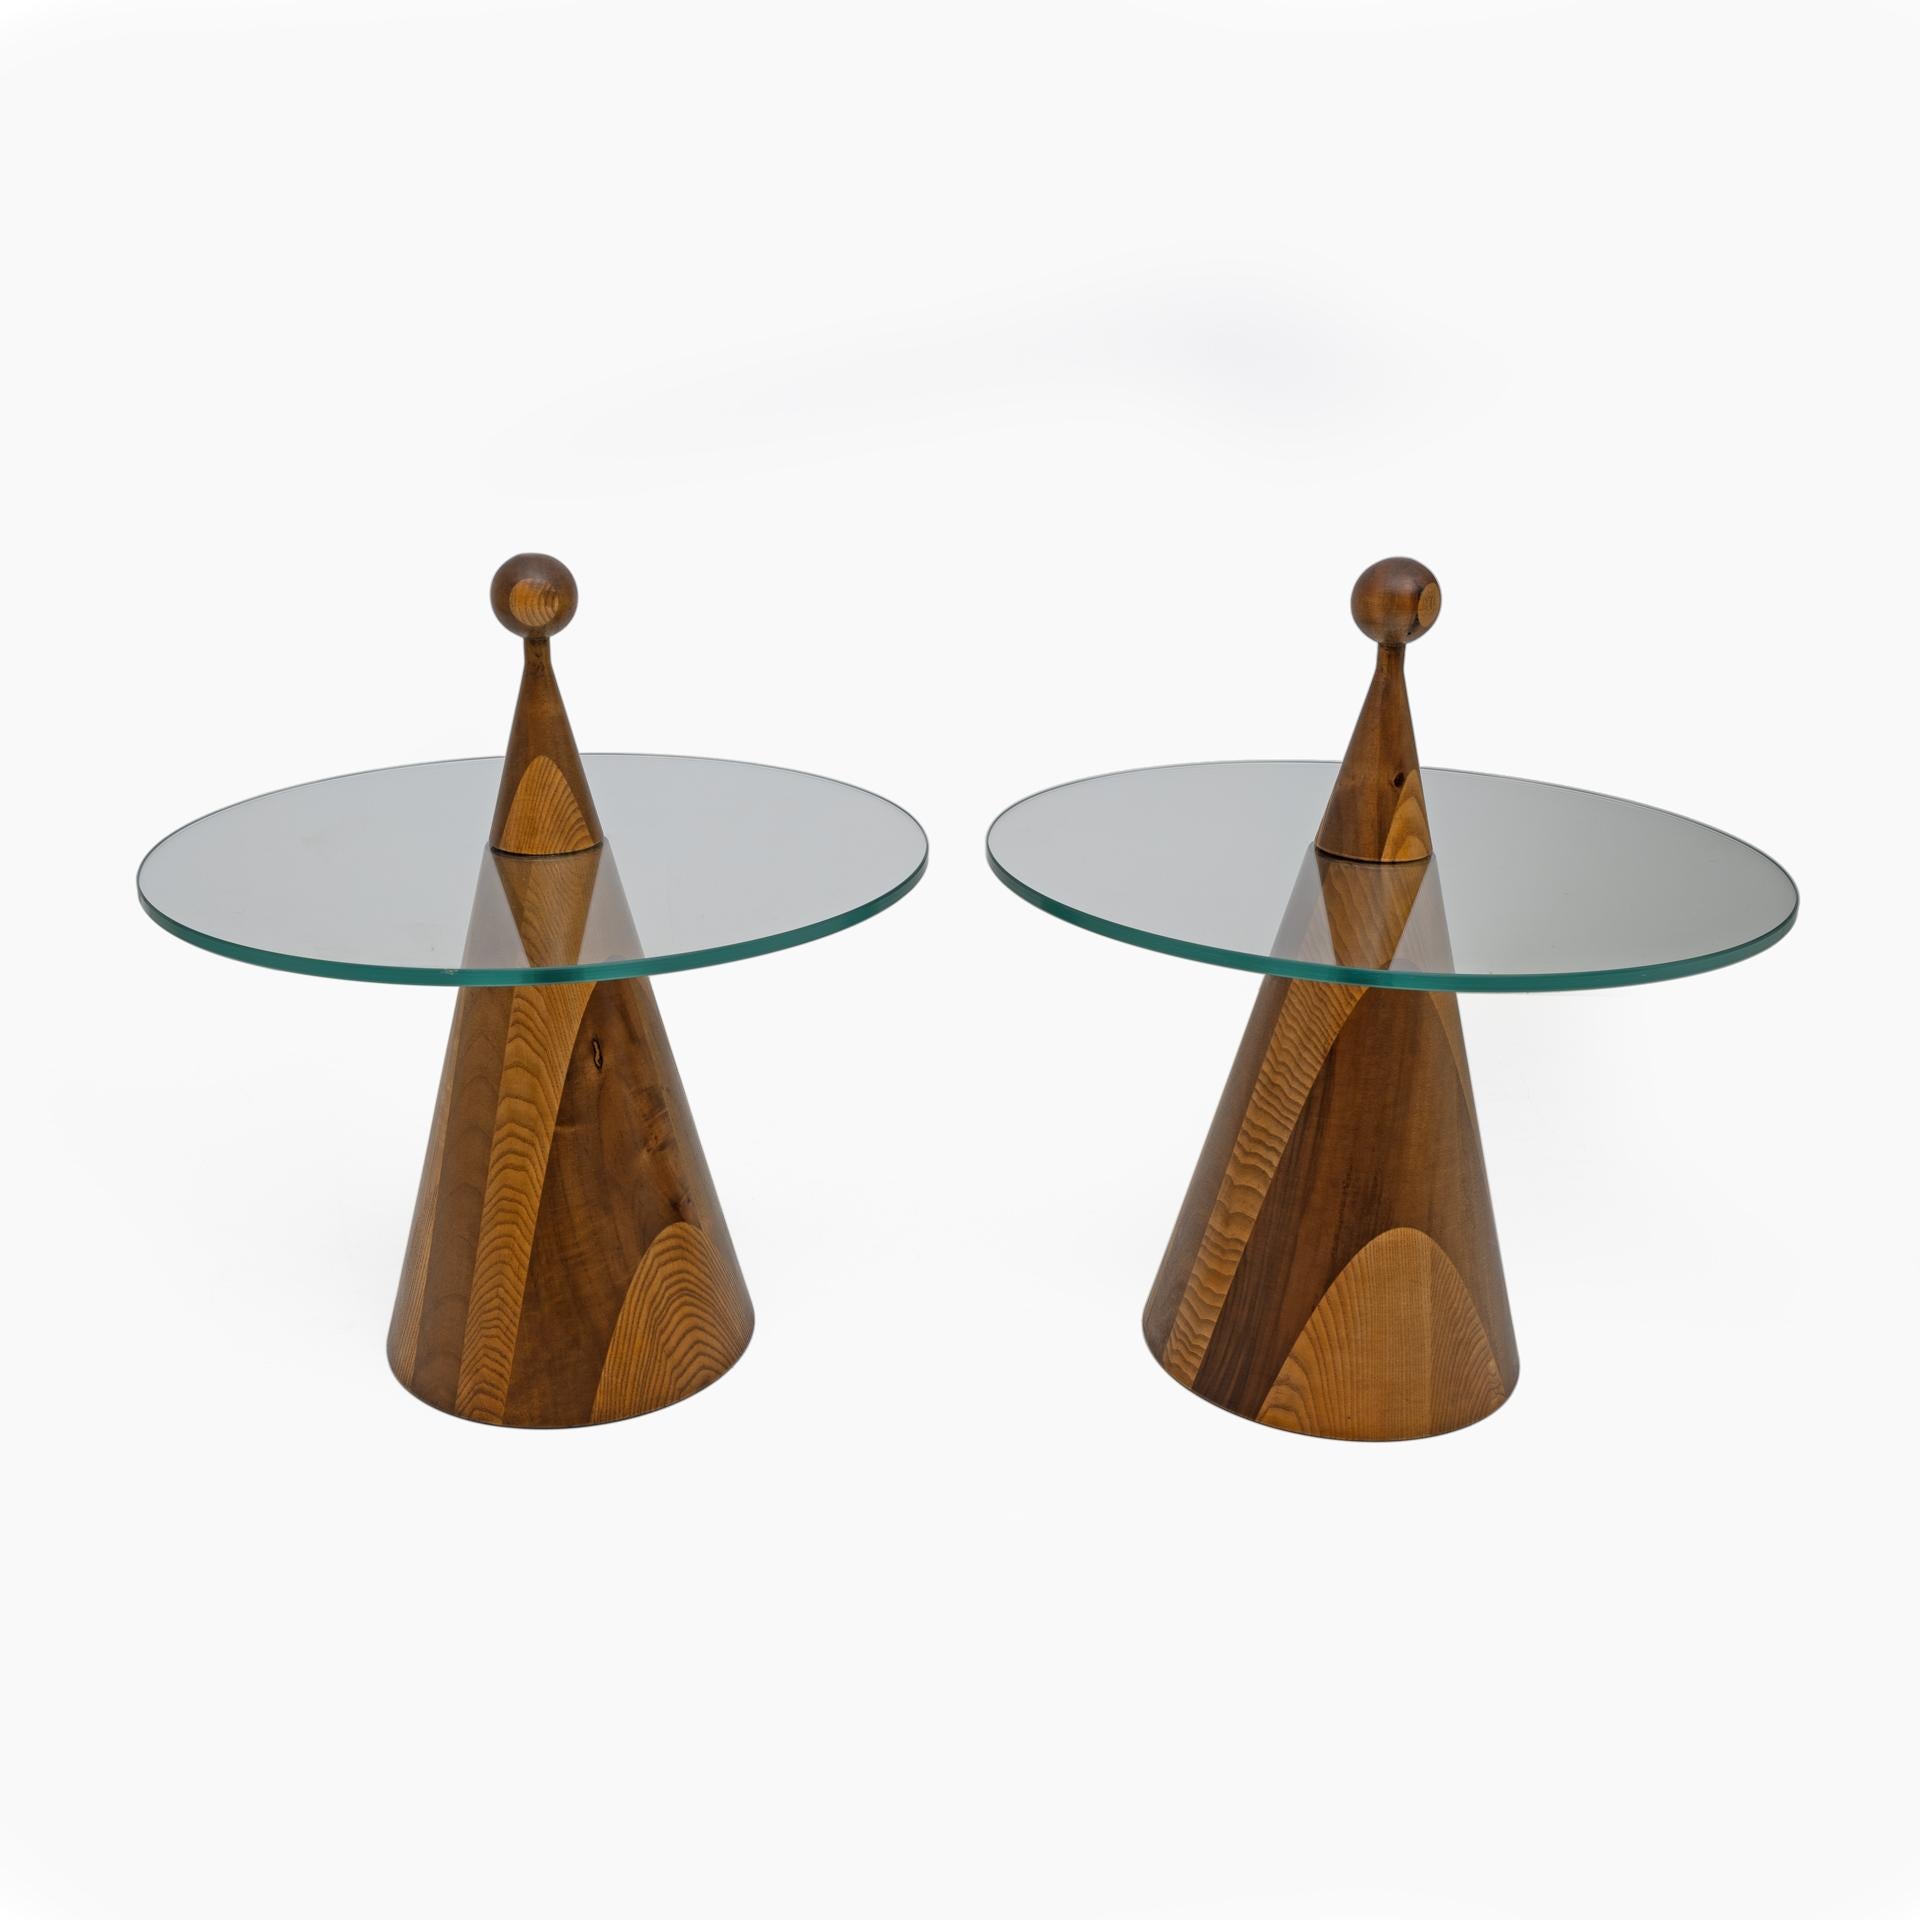 Beautiful Ibisco coffee tables/bedside tables from the 1970s, made of walnut wood and glass. These tables have a characteristic skittle shape, with a round glass top of 50 cm in diameter, supported by elegant walnut wood legs.
Completely restored